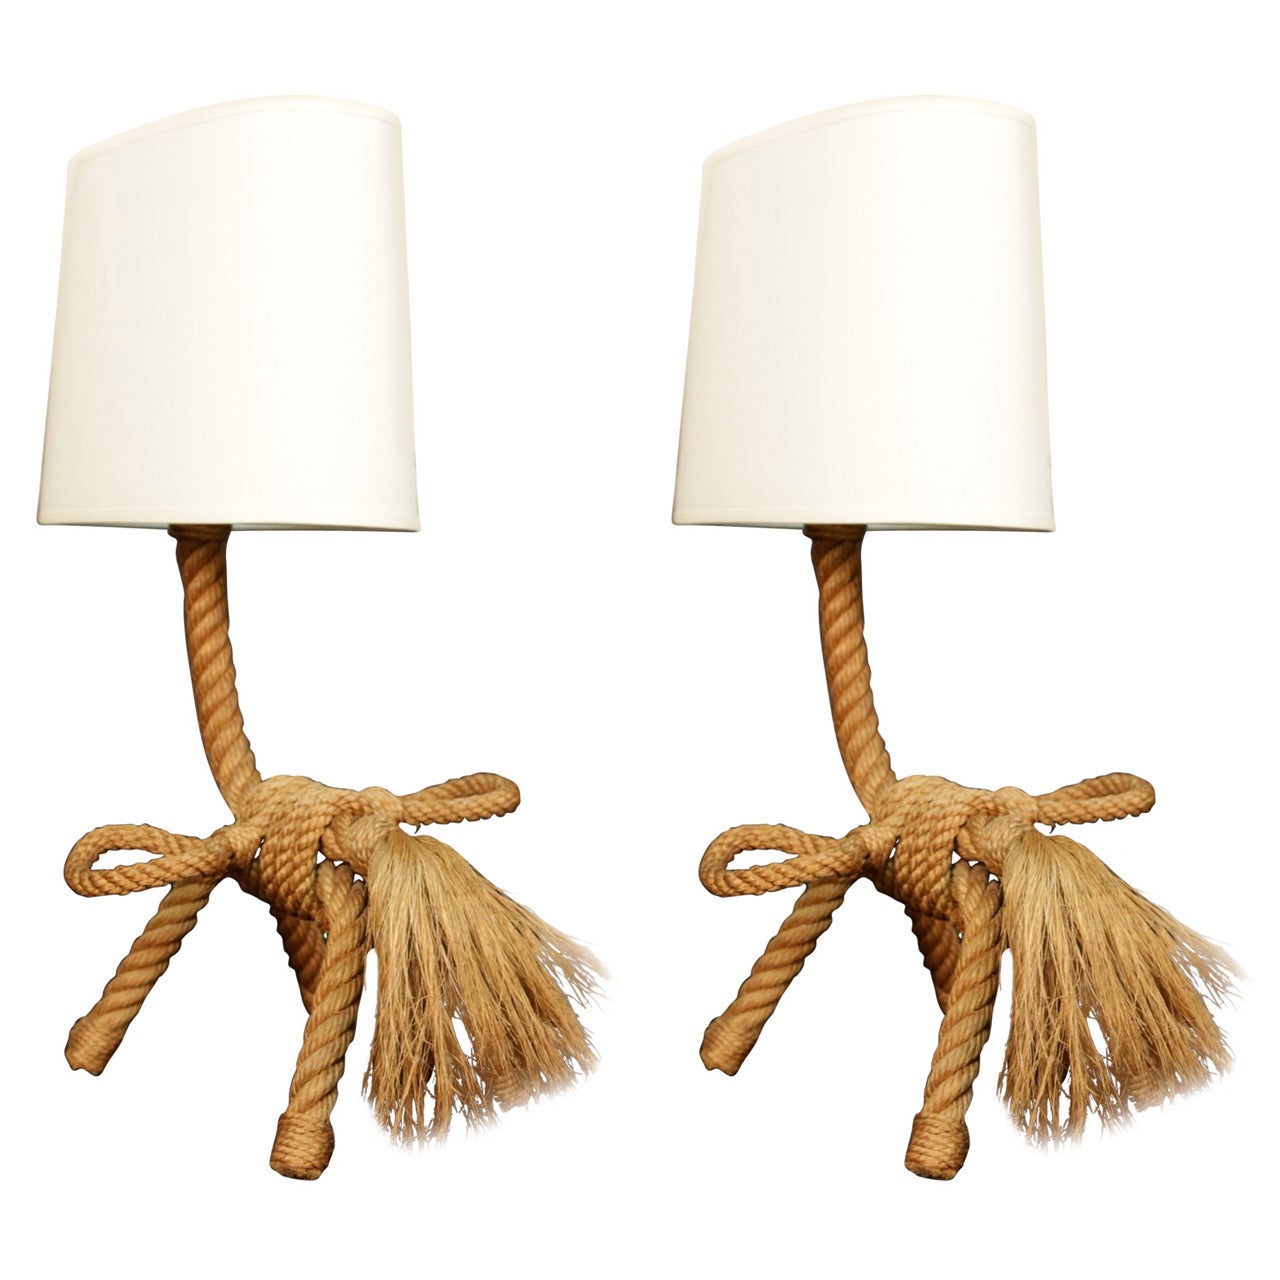 Pair of 1950s 'SmallHorse' Table Lamps by Adrien Audoux and Frida Minet